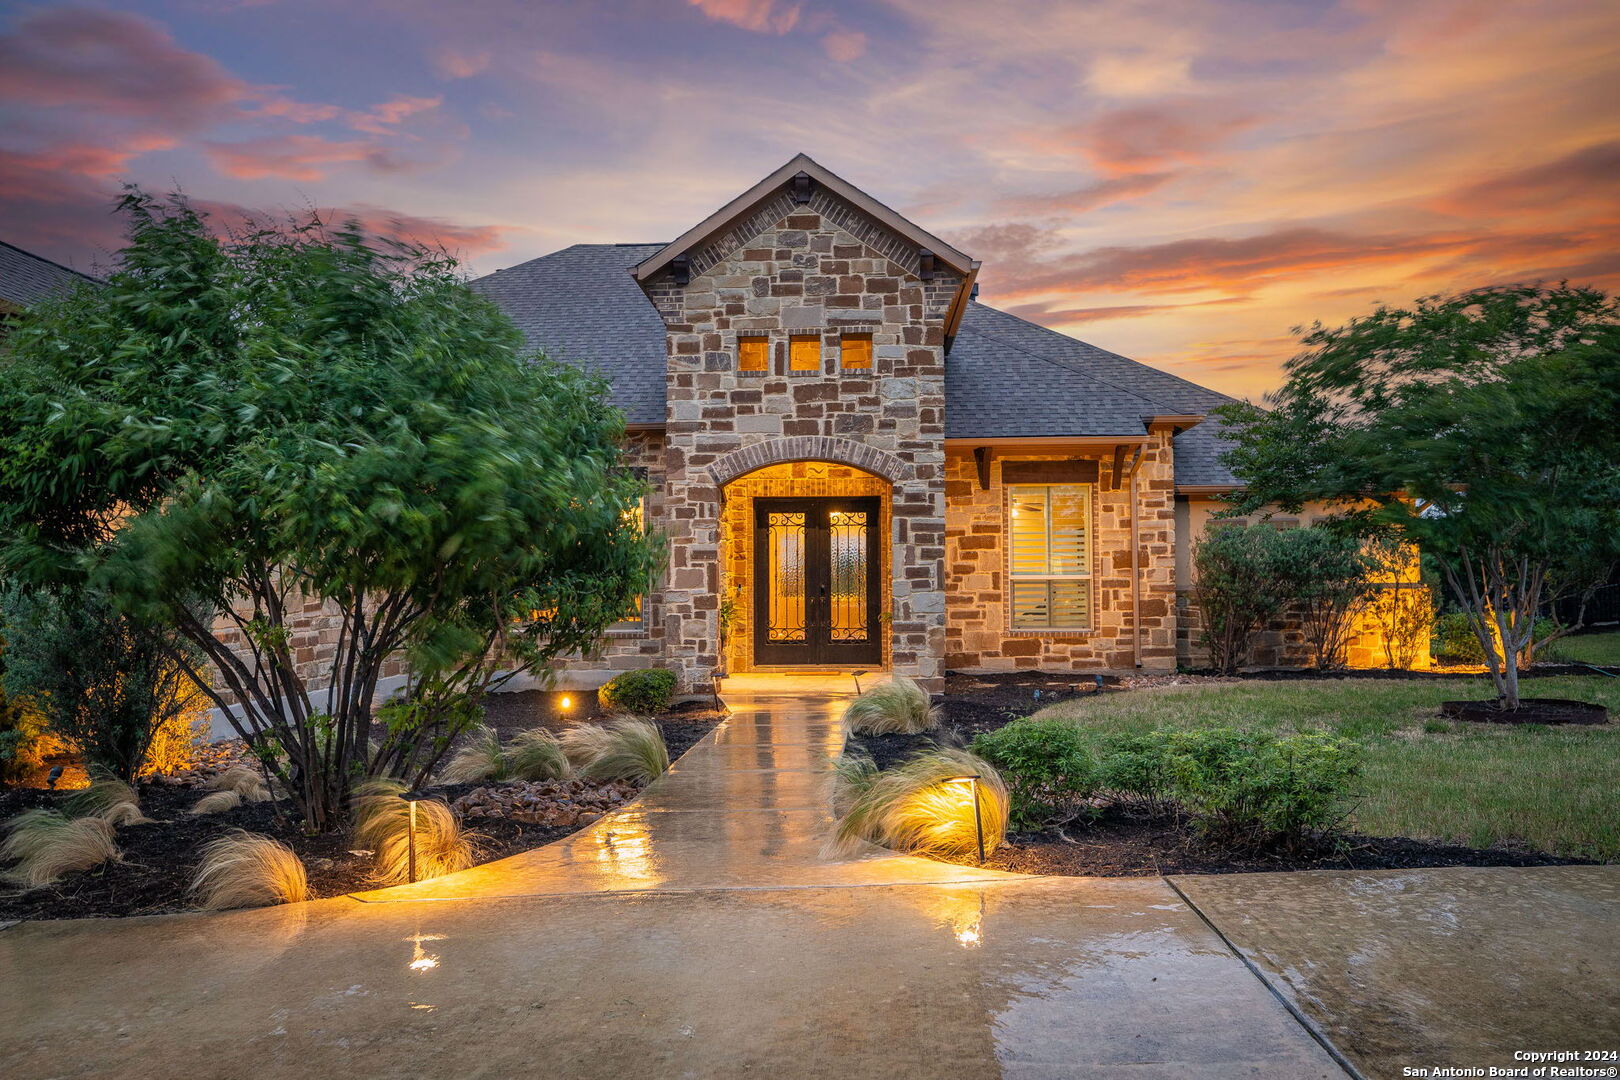 Photo of 2227 Ranch Loop Dr in New Braunfels, TX